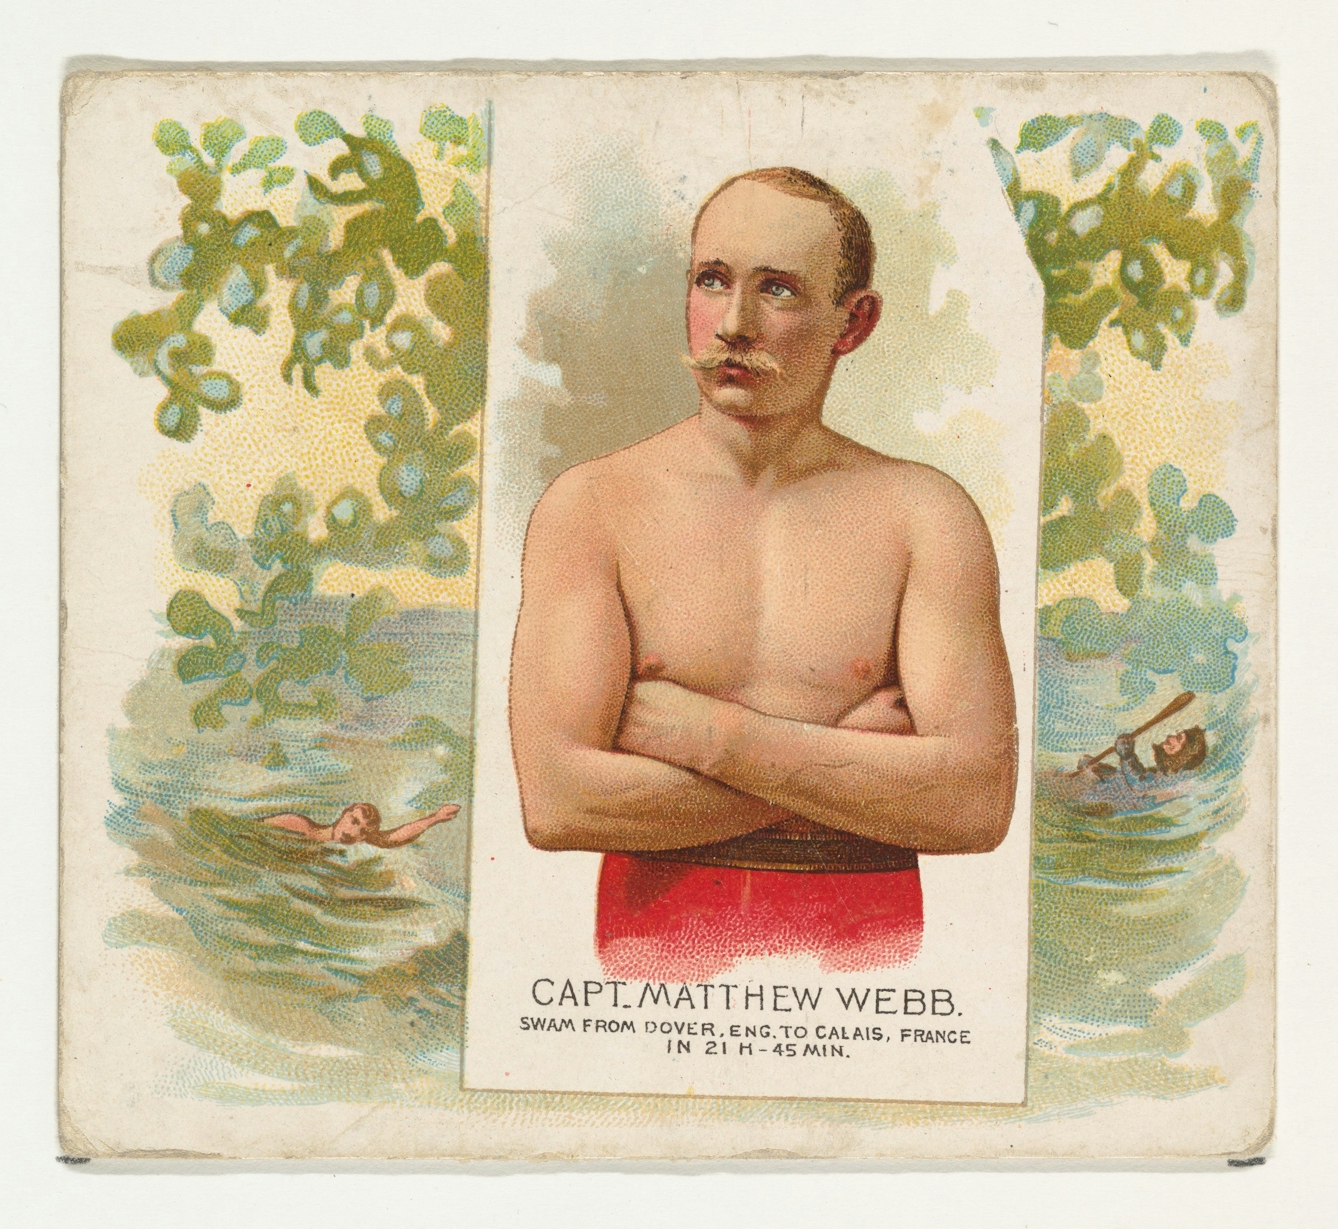 Colour print of Captain Matthew Web - shown with arms crossed across his bare chest in the foreground, and behind swimming.